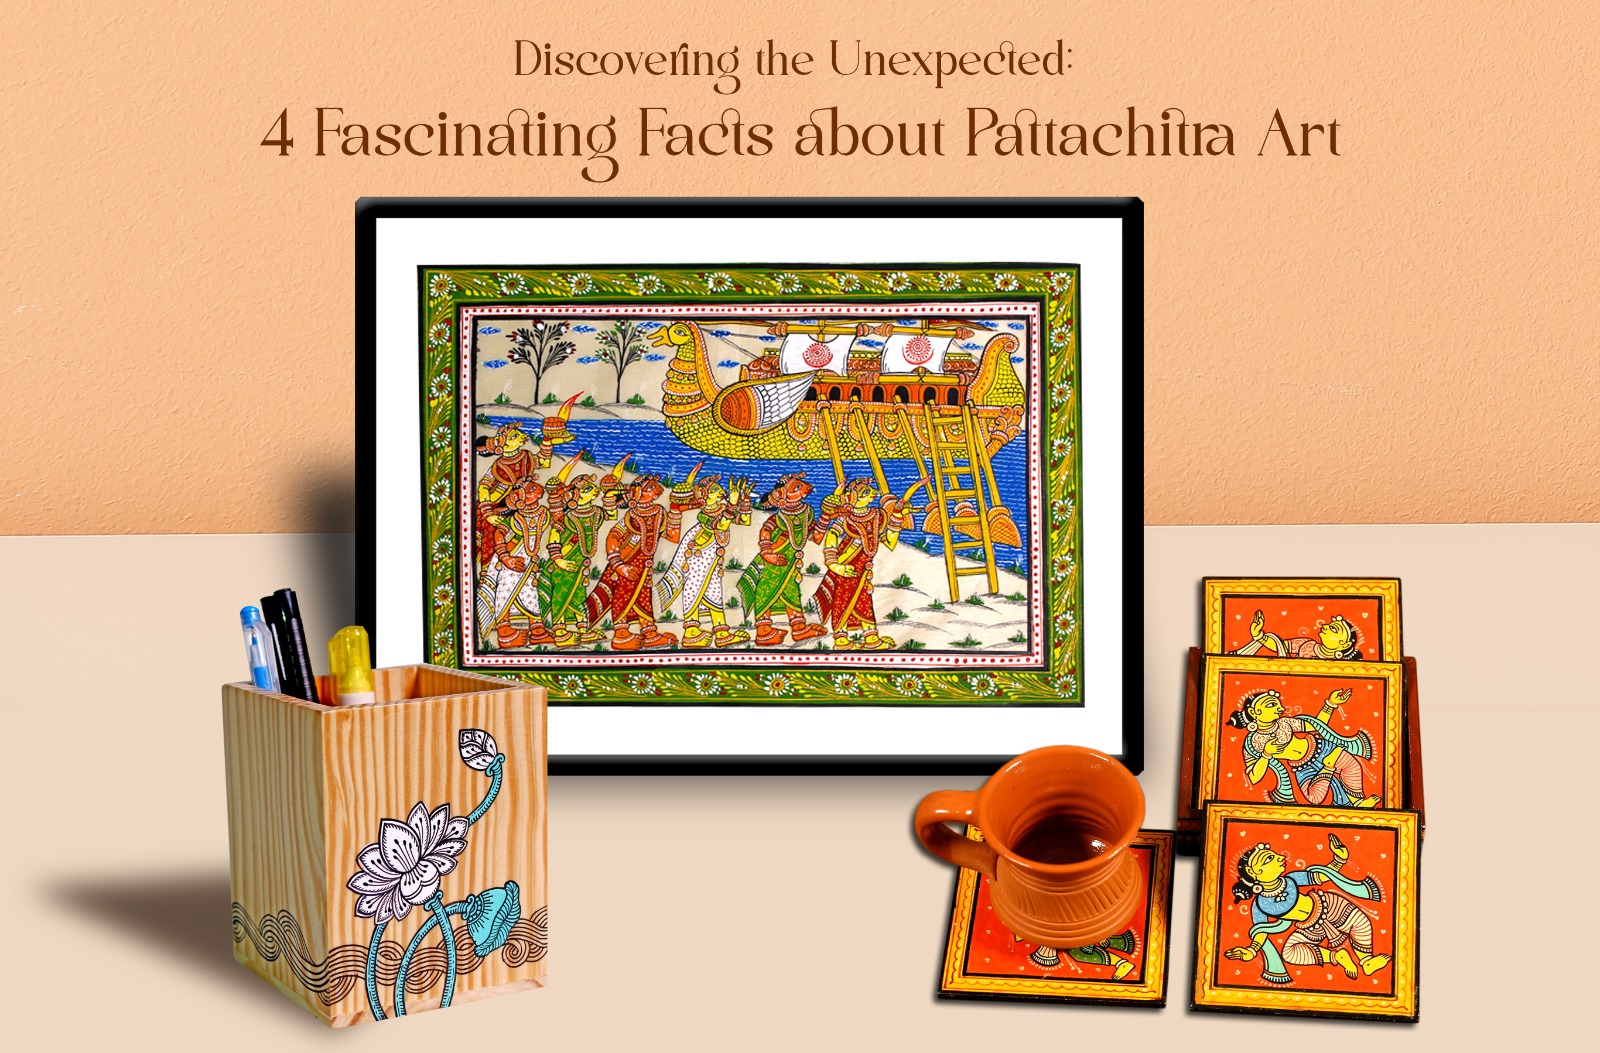 4 Fascinating Facts about Pattachitra Art